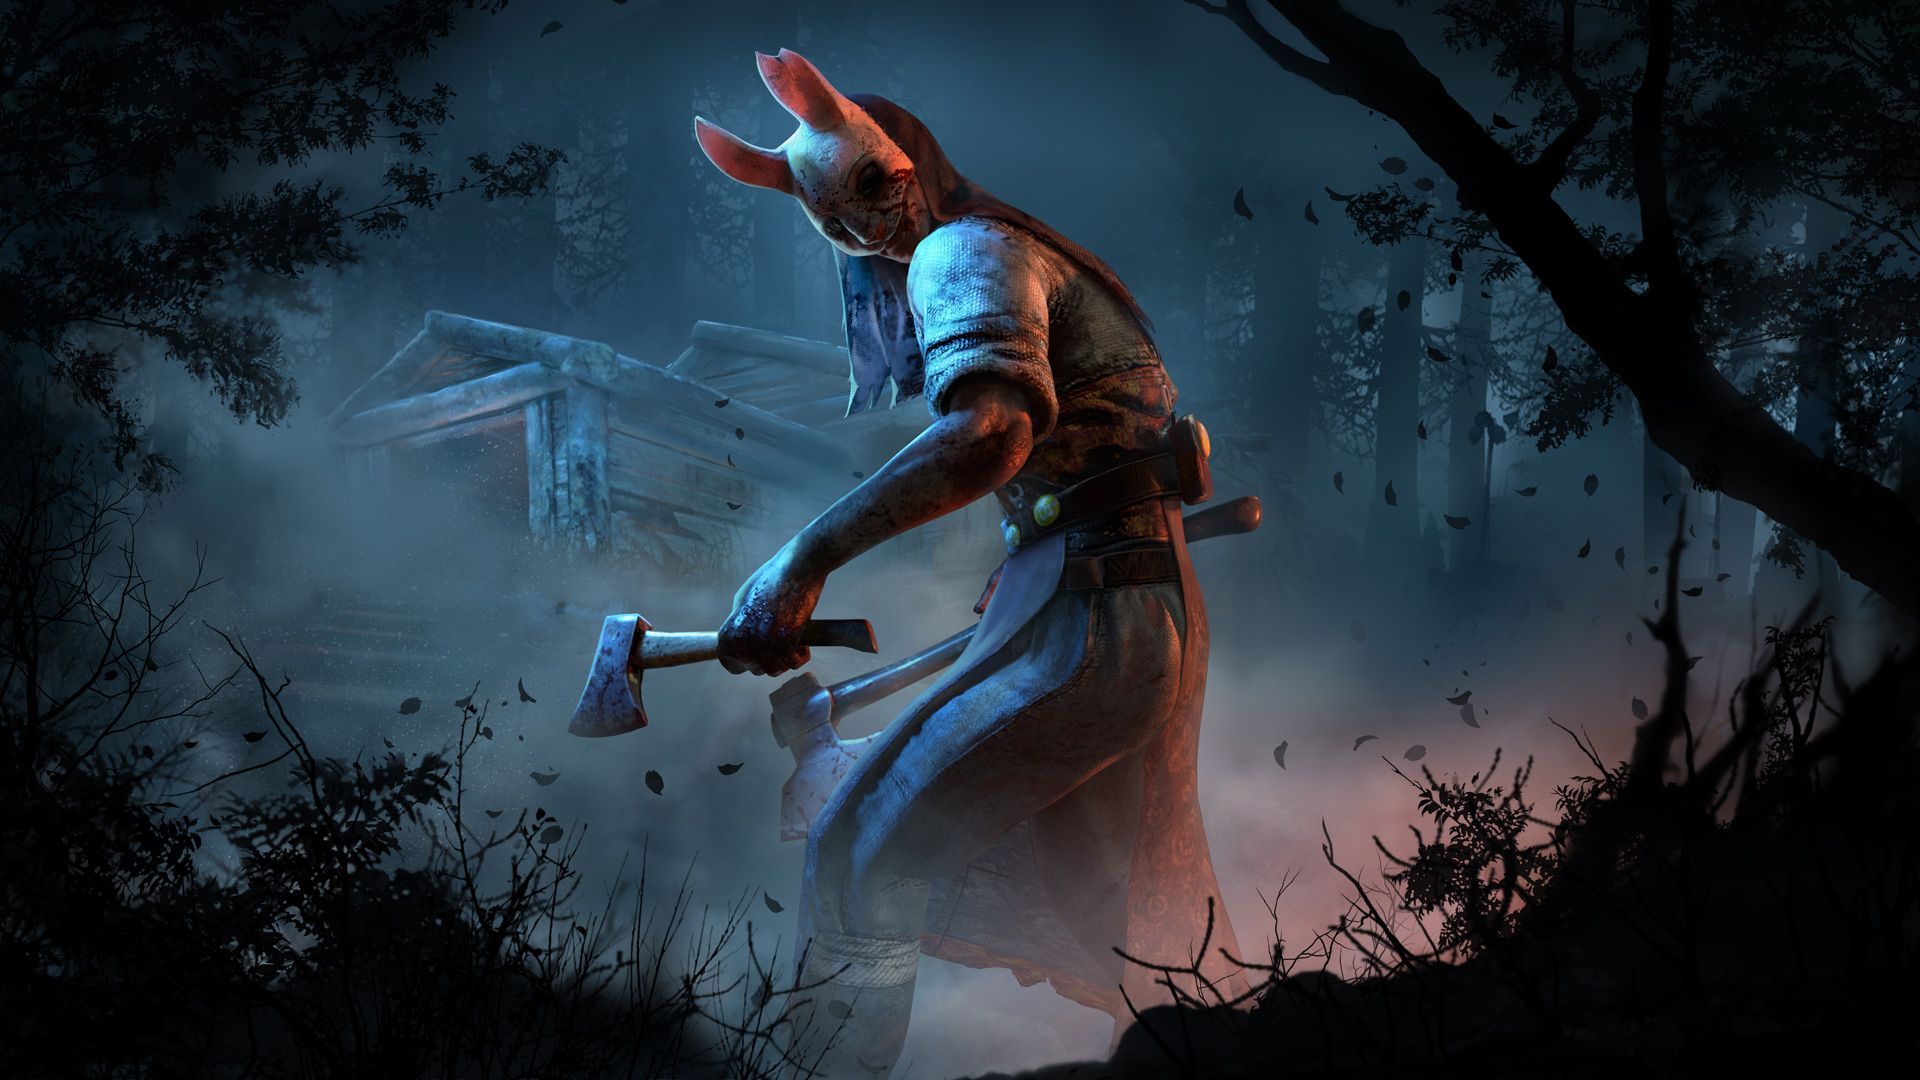 Dead By Daylight Wallpaper Image Result For Dead By